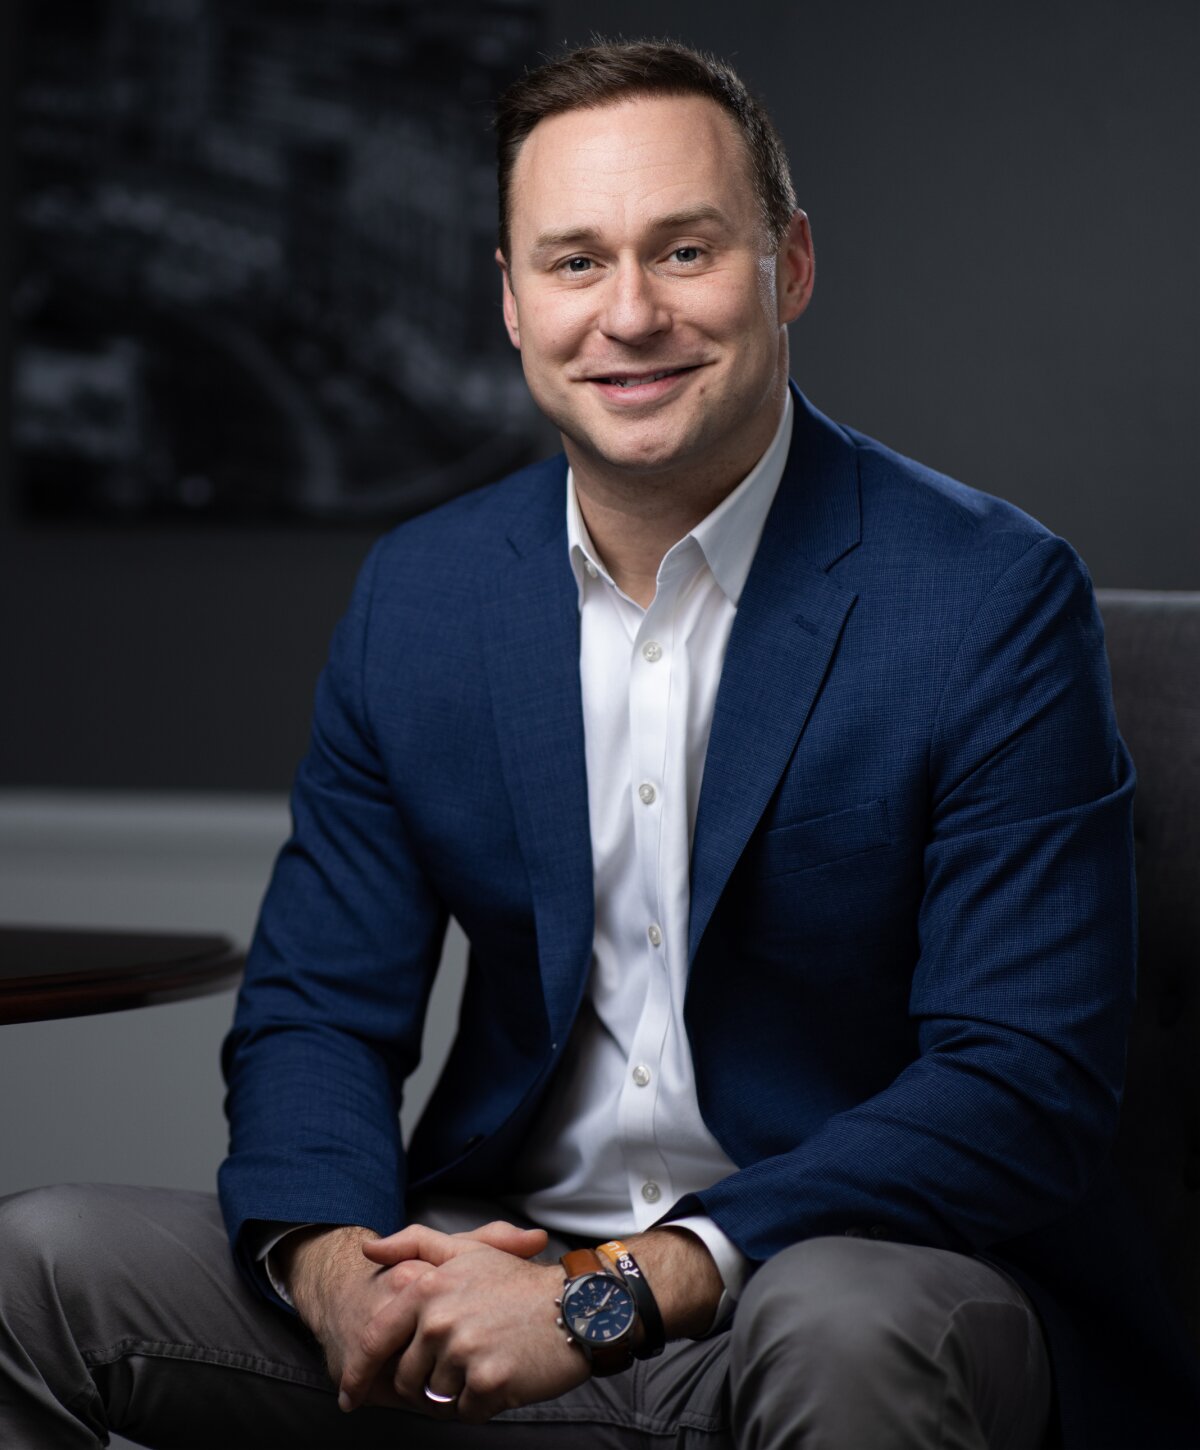 Jason Werner, Accredited Investment Fiduciary and owner of Werner Financial